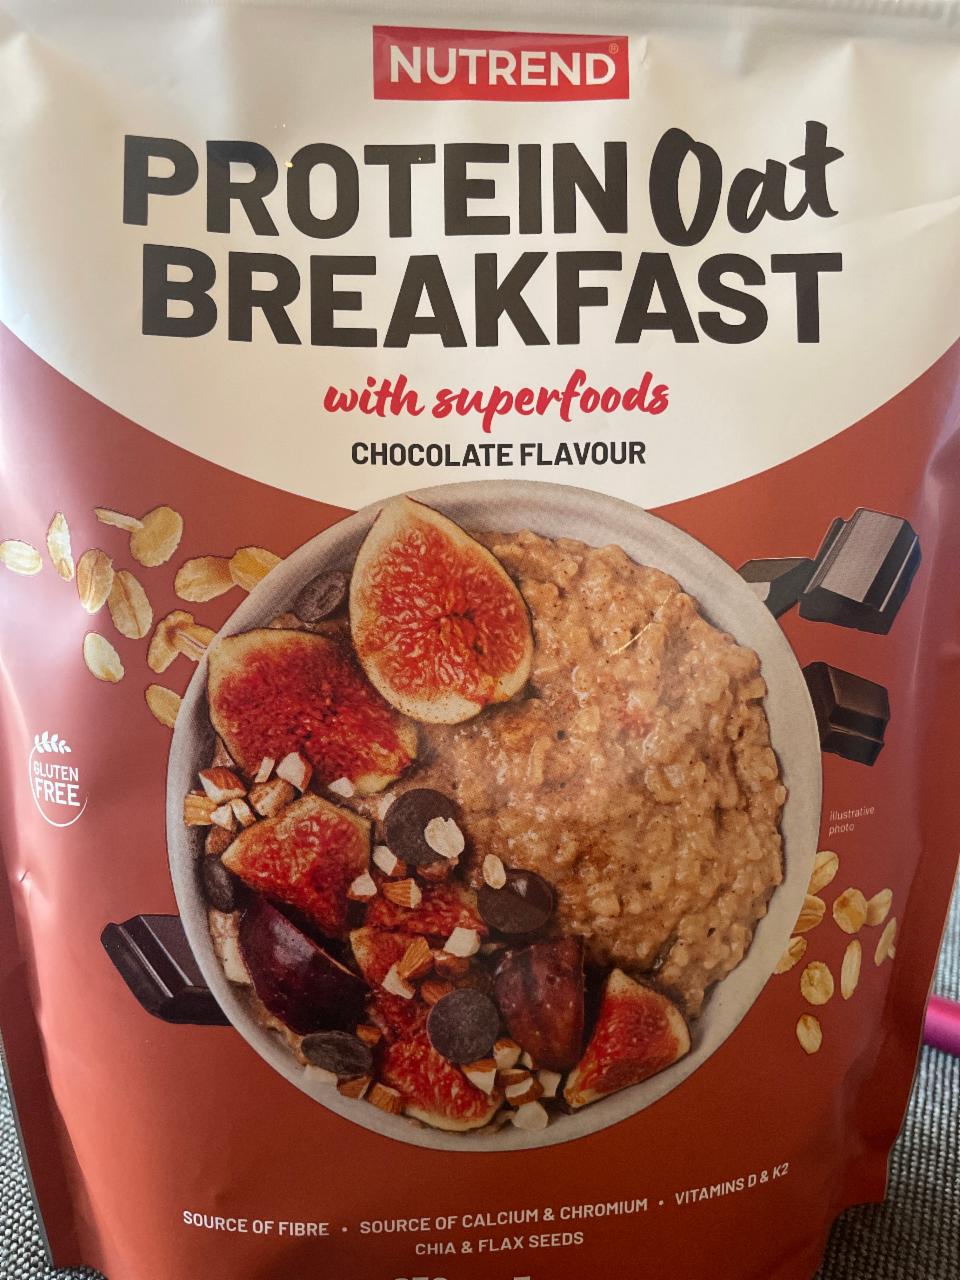 Fotografie - Protein Oat Breakfast with superfoods chocolate flavour Nutrend